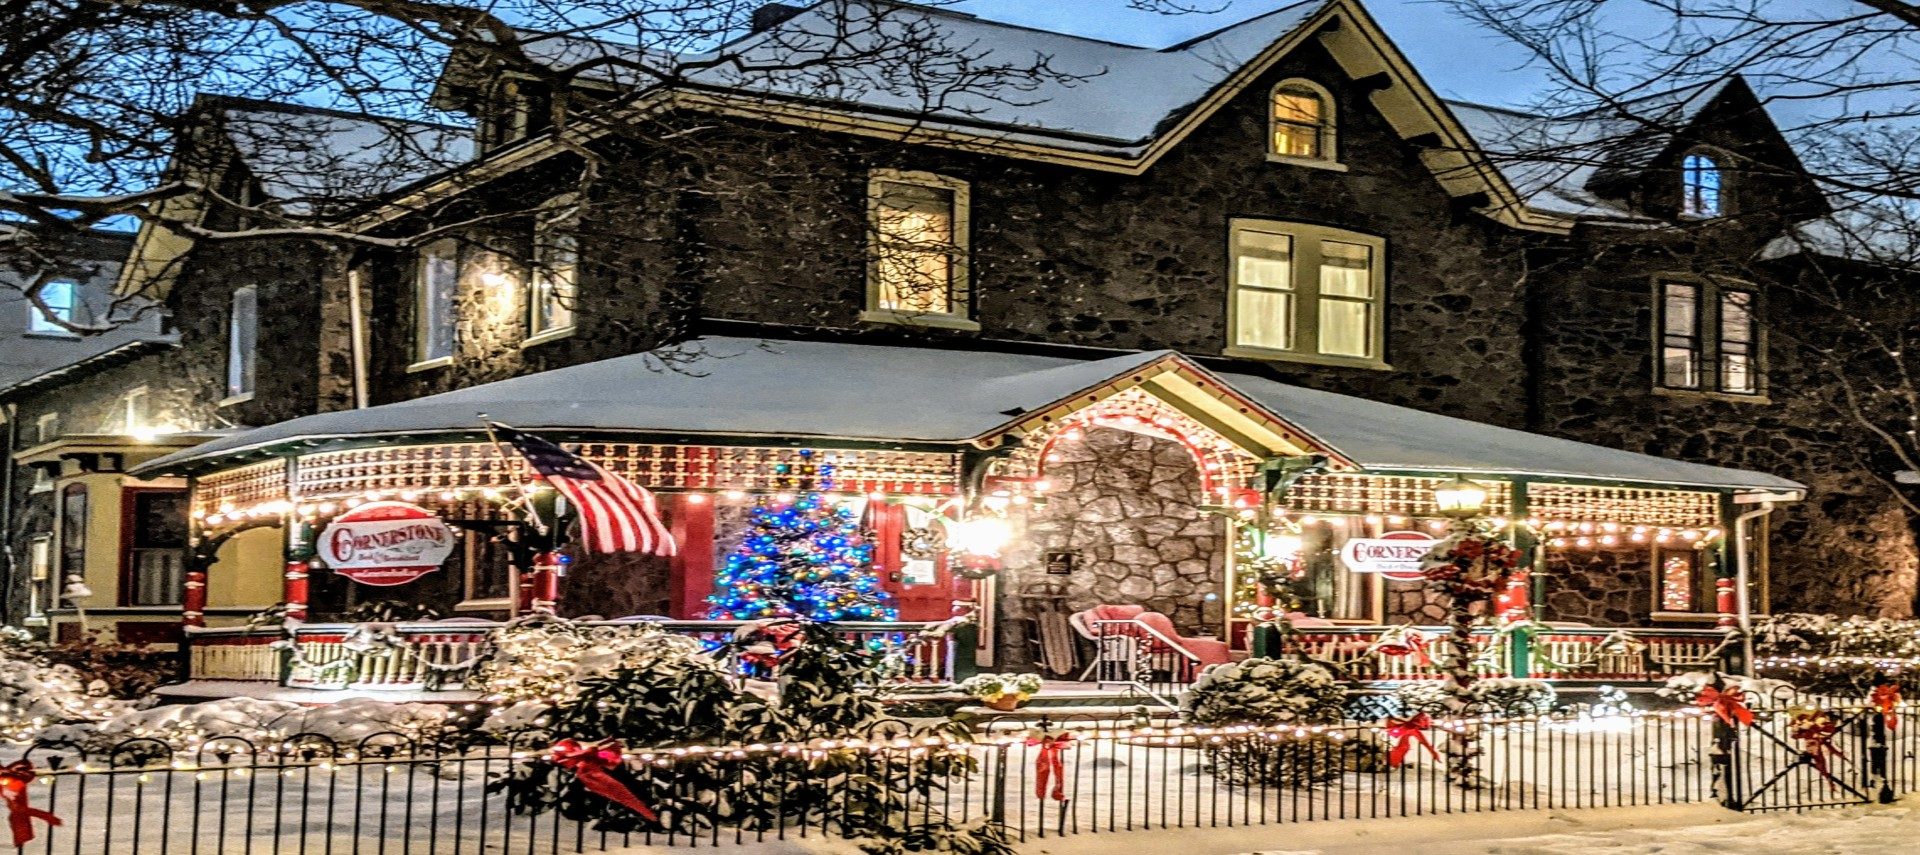 Snow covered house with Christmas lights and decorations